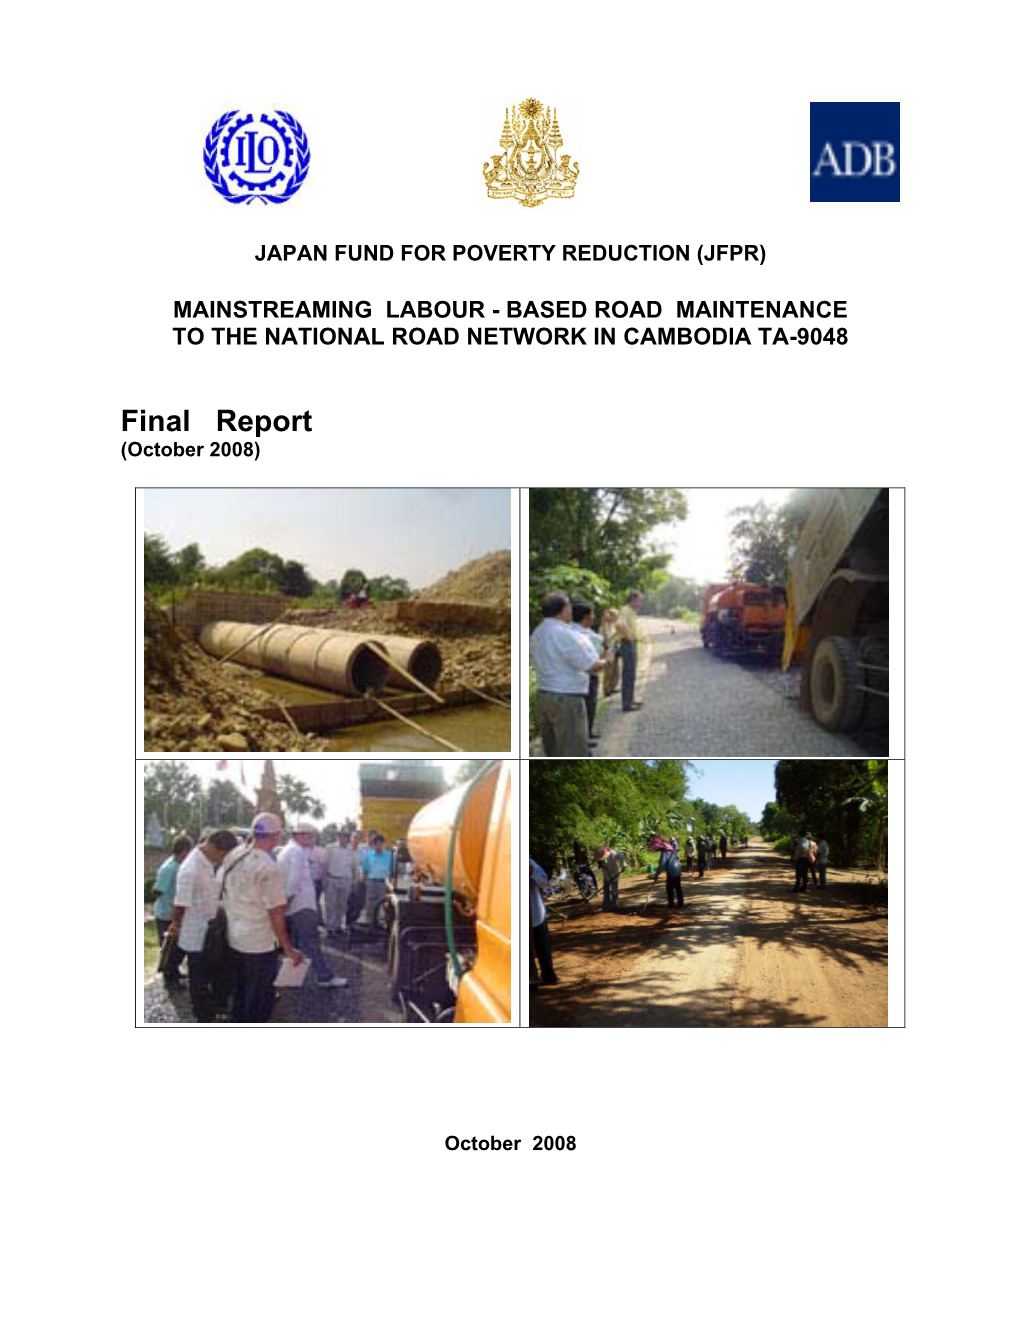 Mainstreaming Labour-Based Road Maintenance to the National Road Network, ADB/JFPR TA-9048